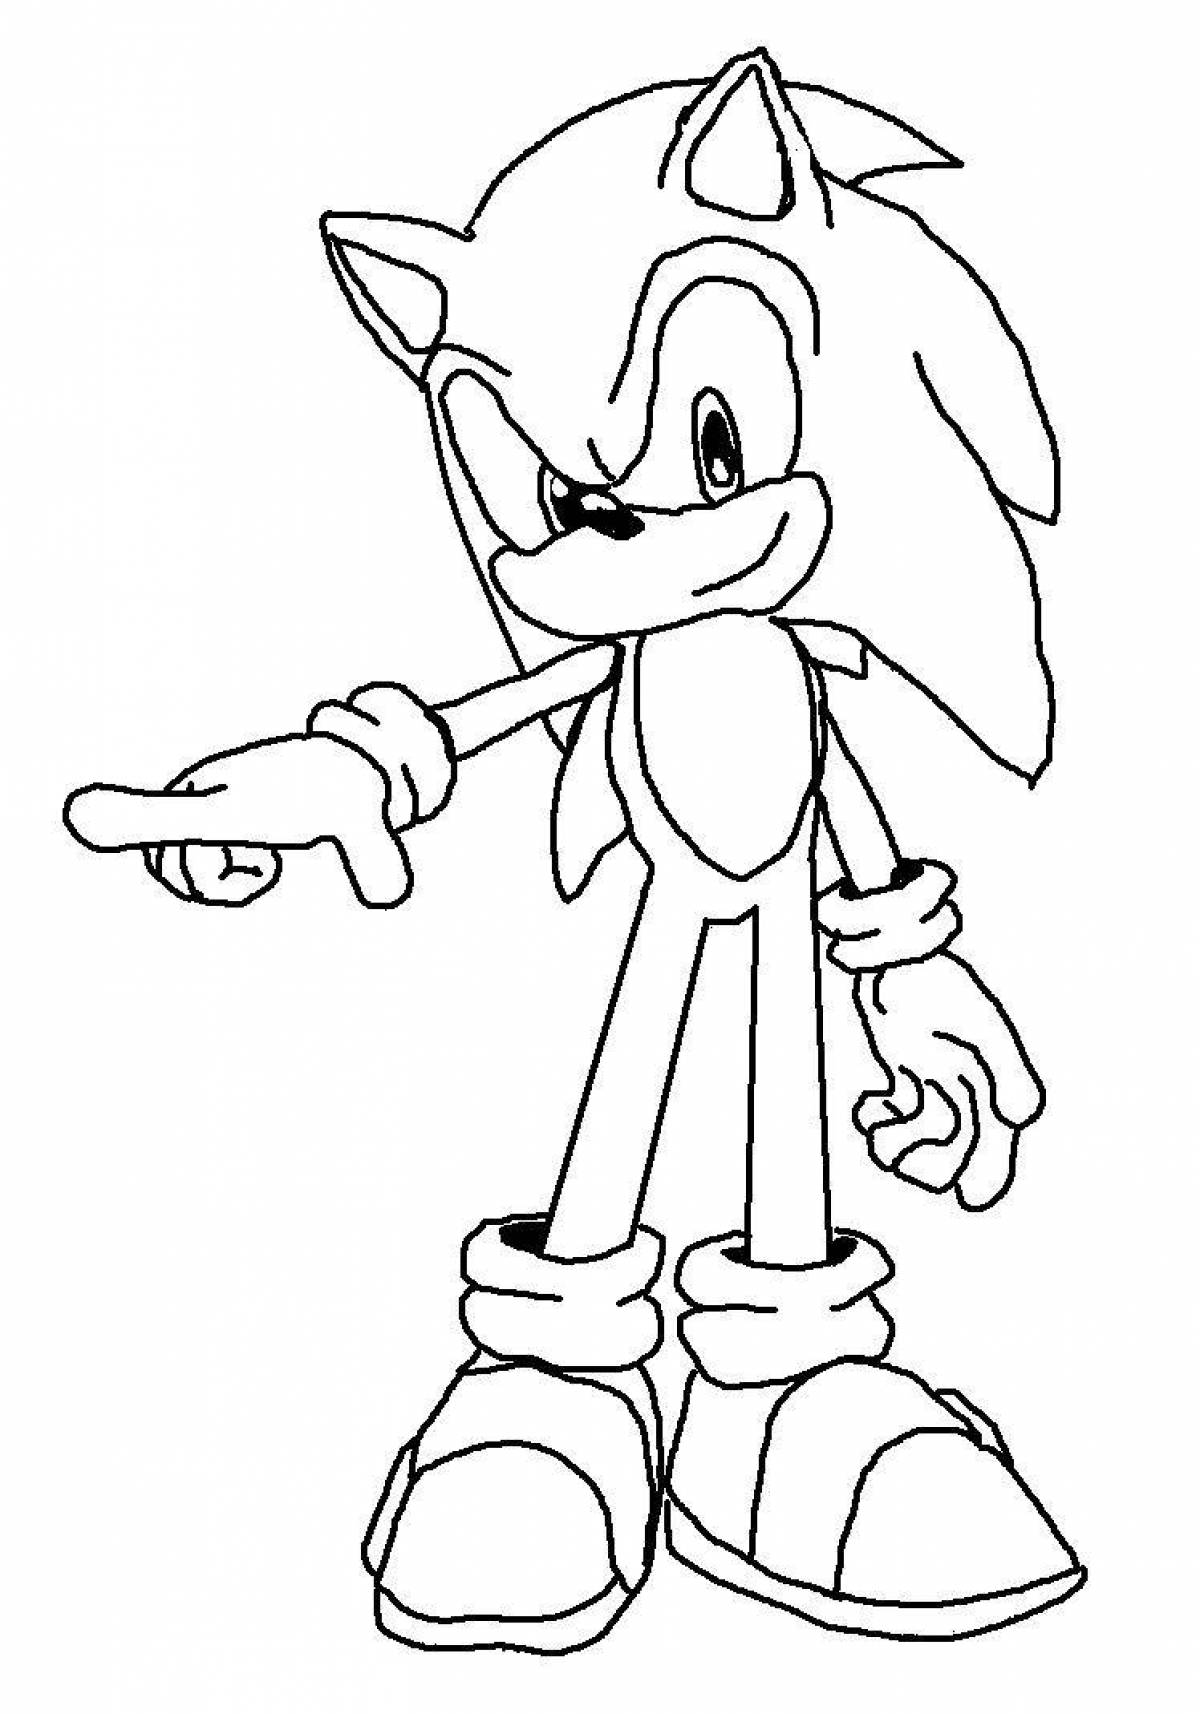 Comic sonic coloring page